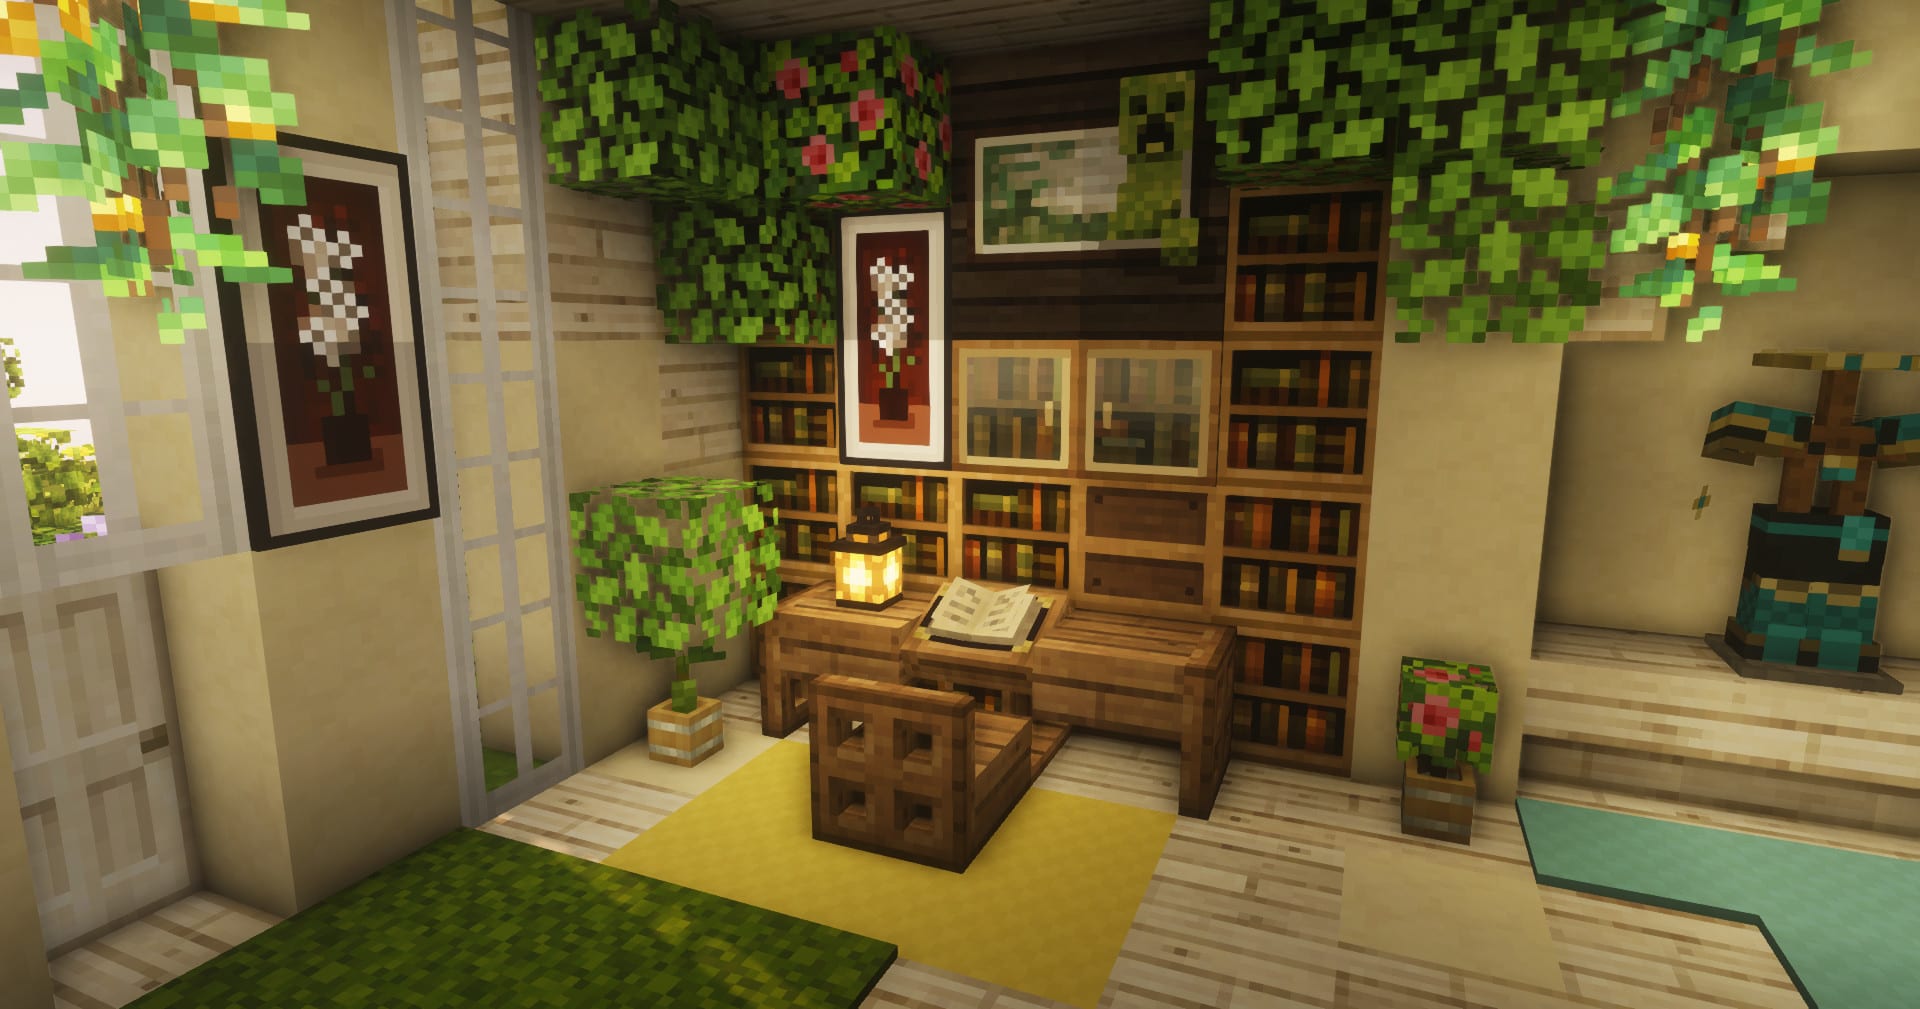 Make an interior for your minecraft house by Arichoo | Fiverr